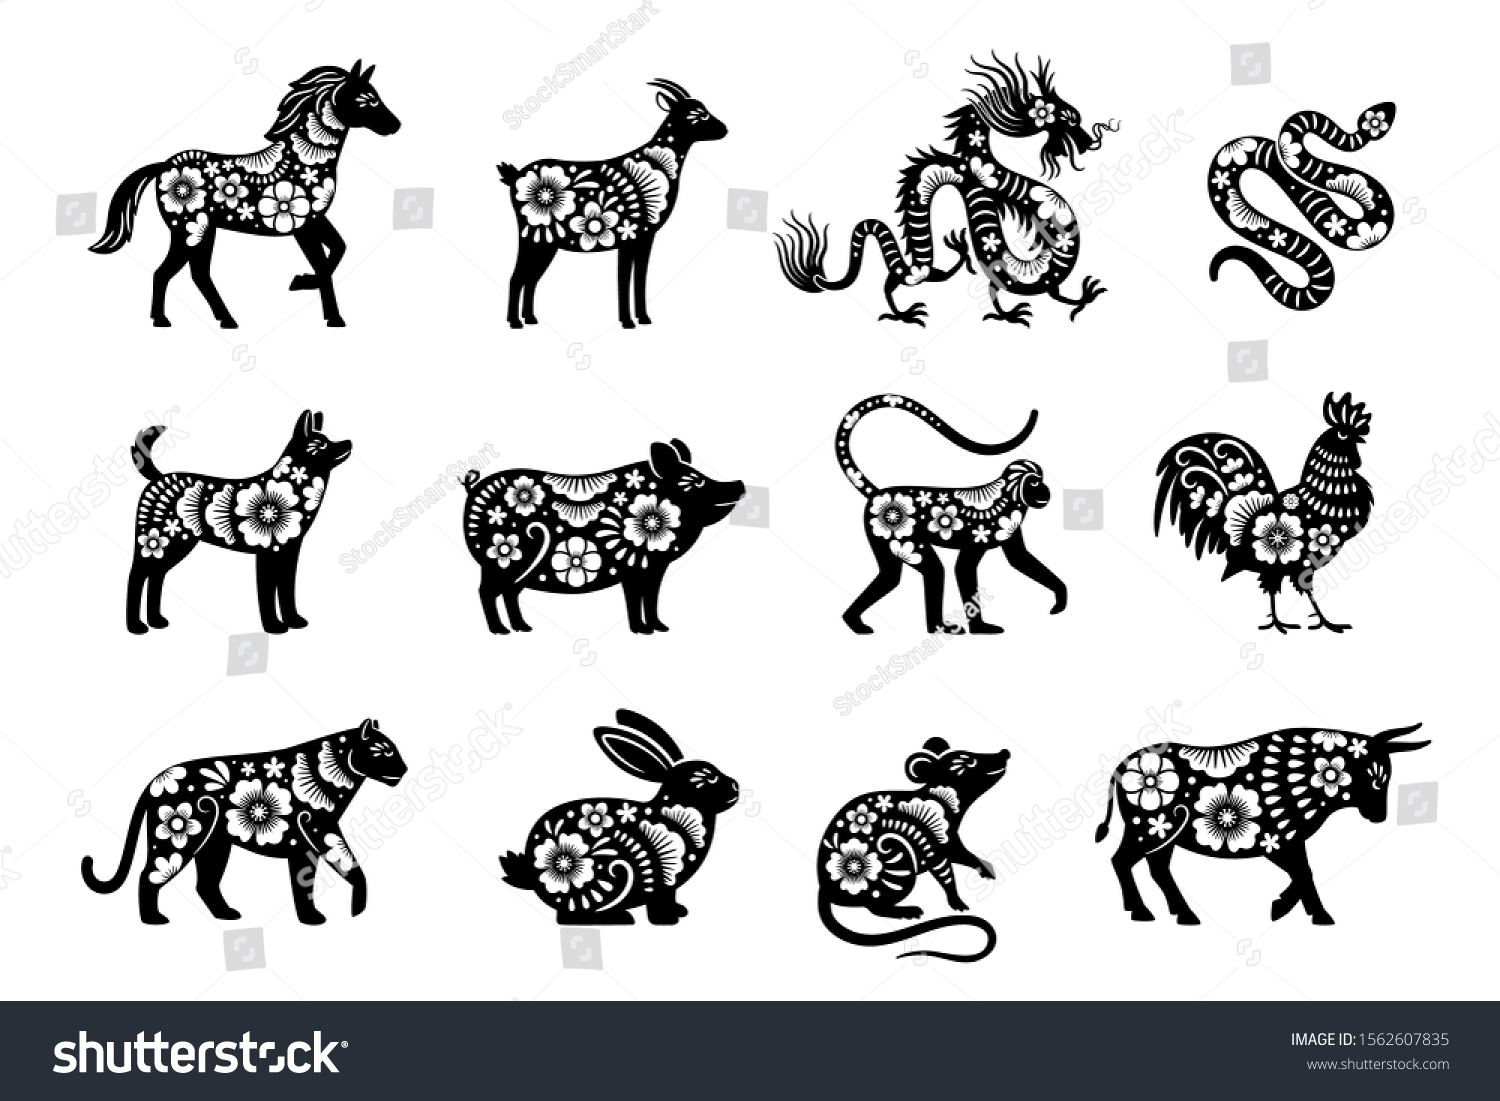 SVG of Traditional chinese horoscope with flowers. Chinese new year animals set, tiger and snake, dragon and pig vector mascot drawings with flora patterns svg